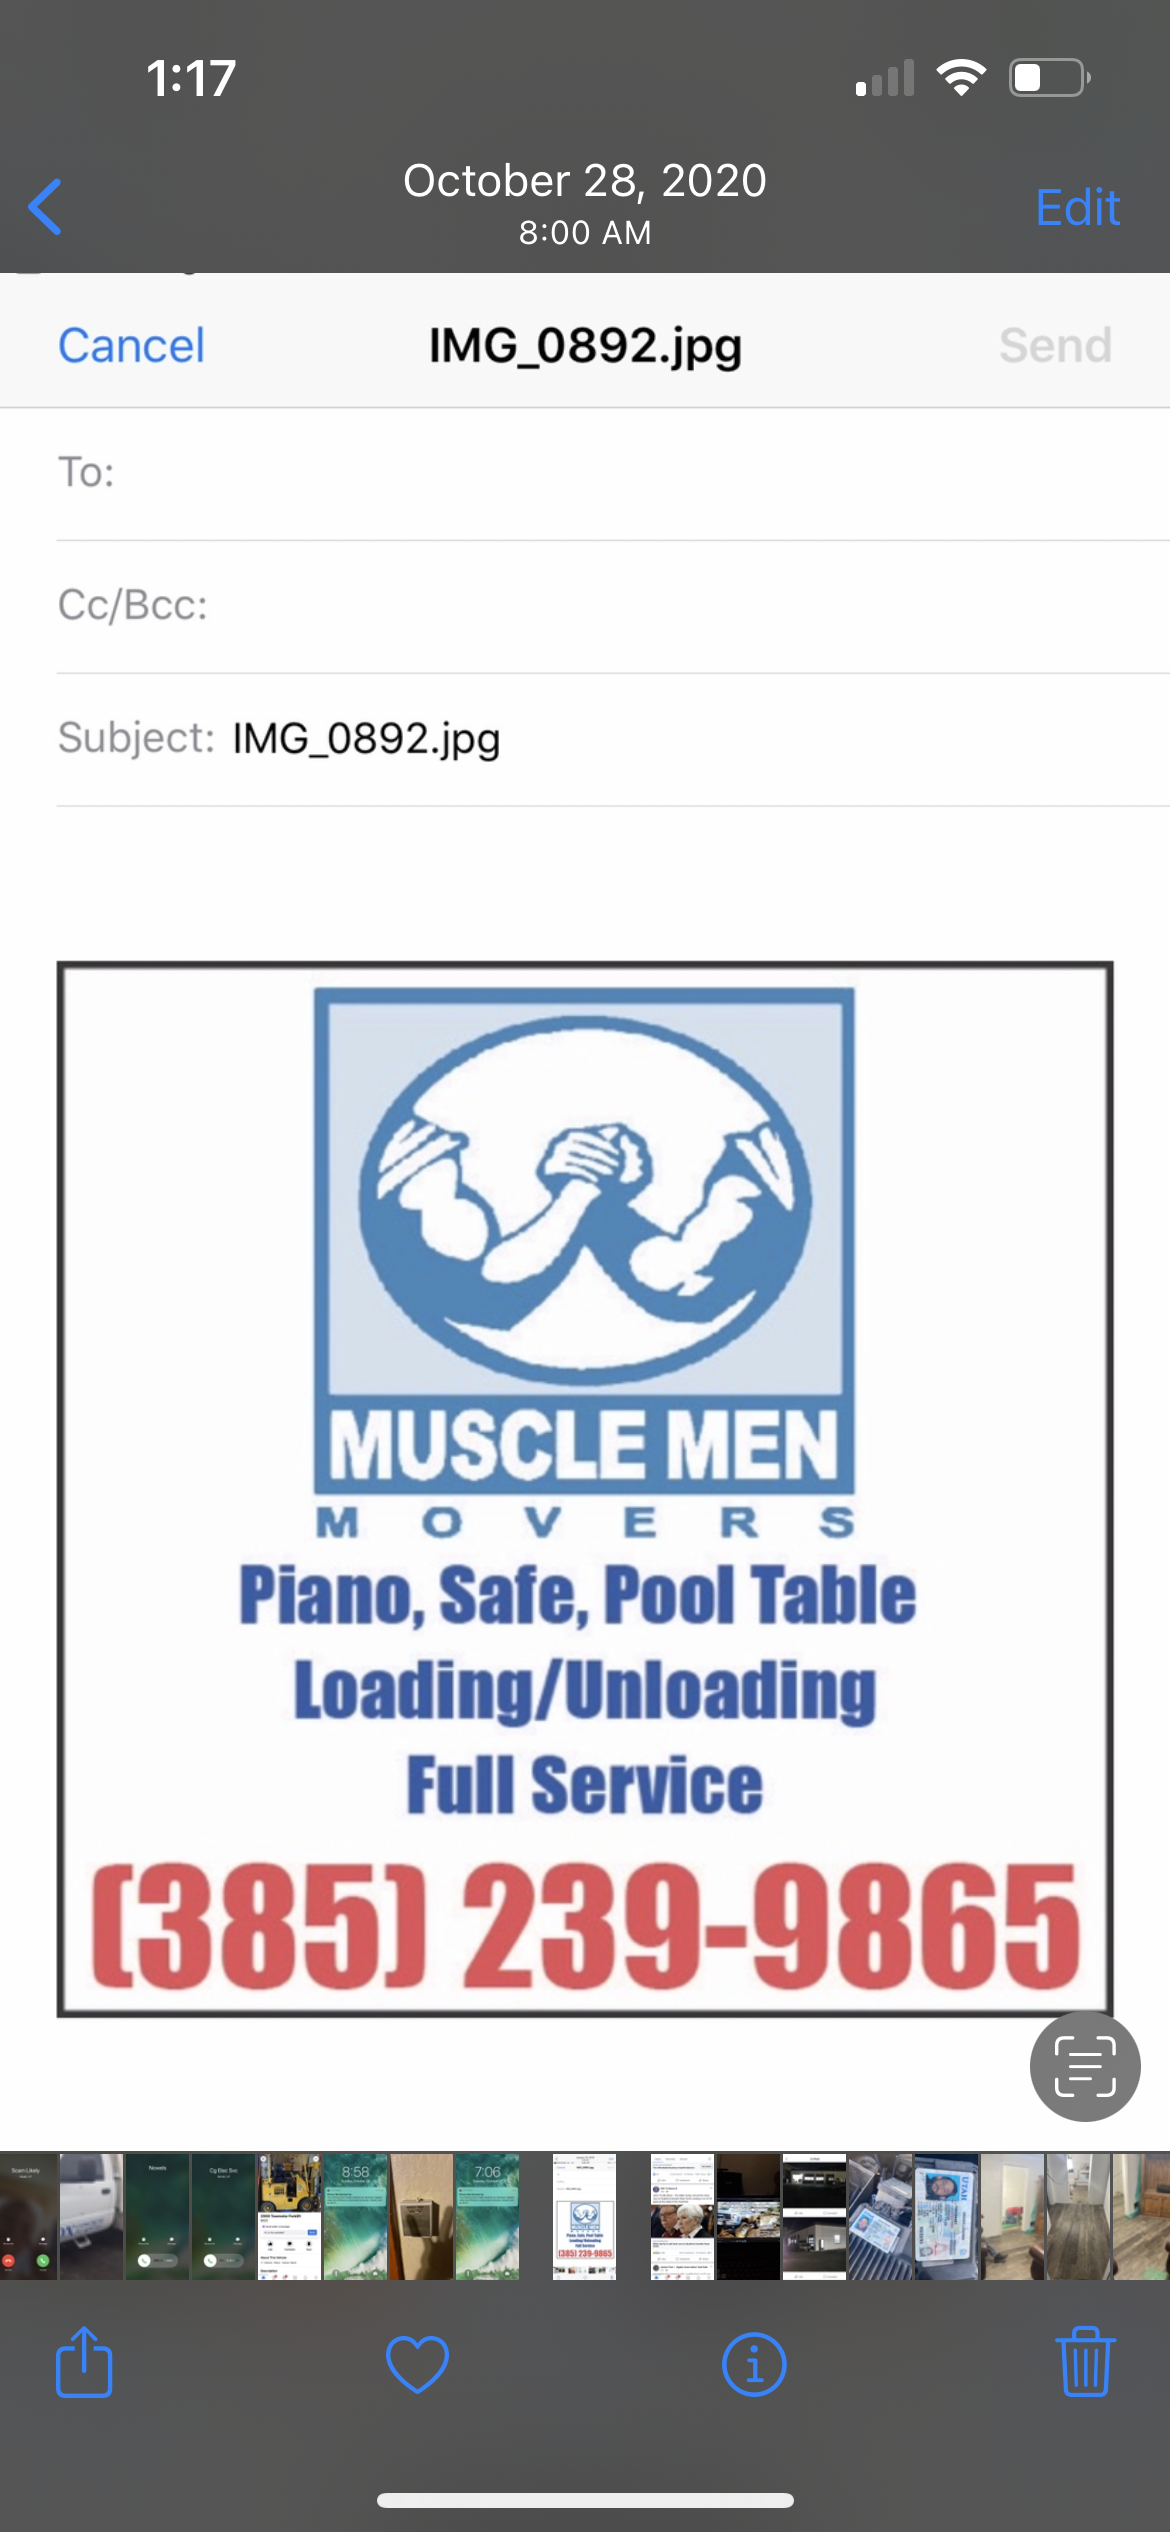 MUSCLE MEN MOVERS